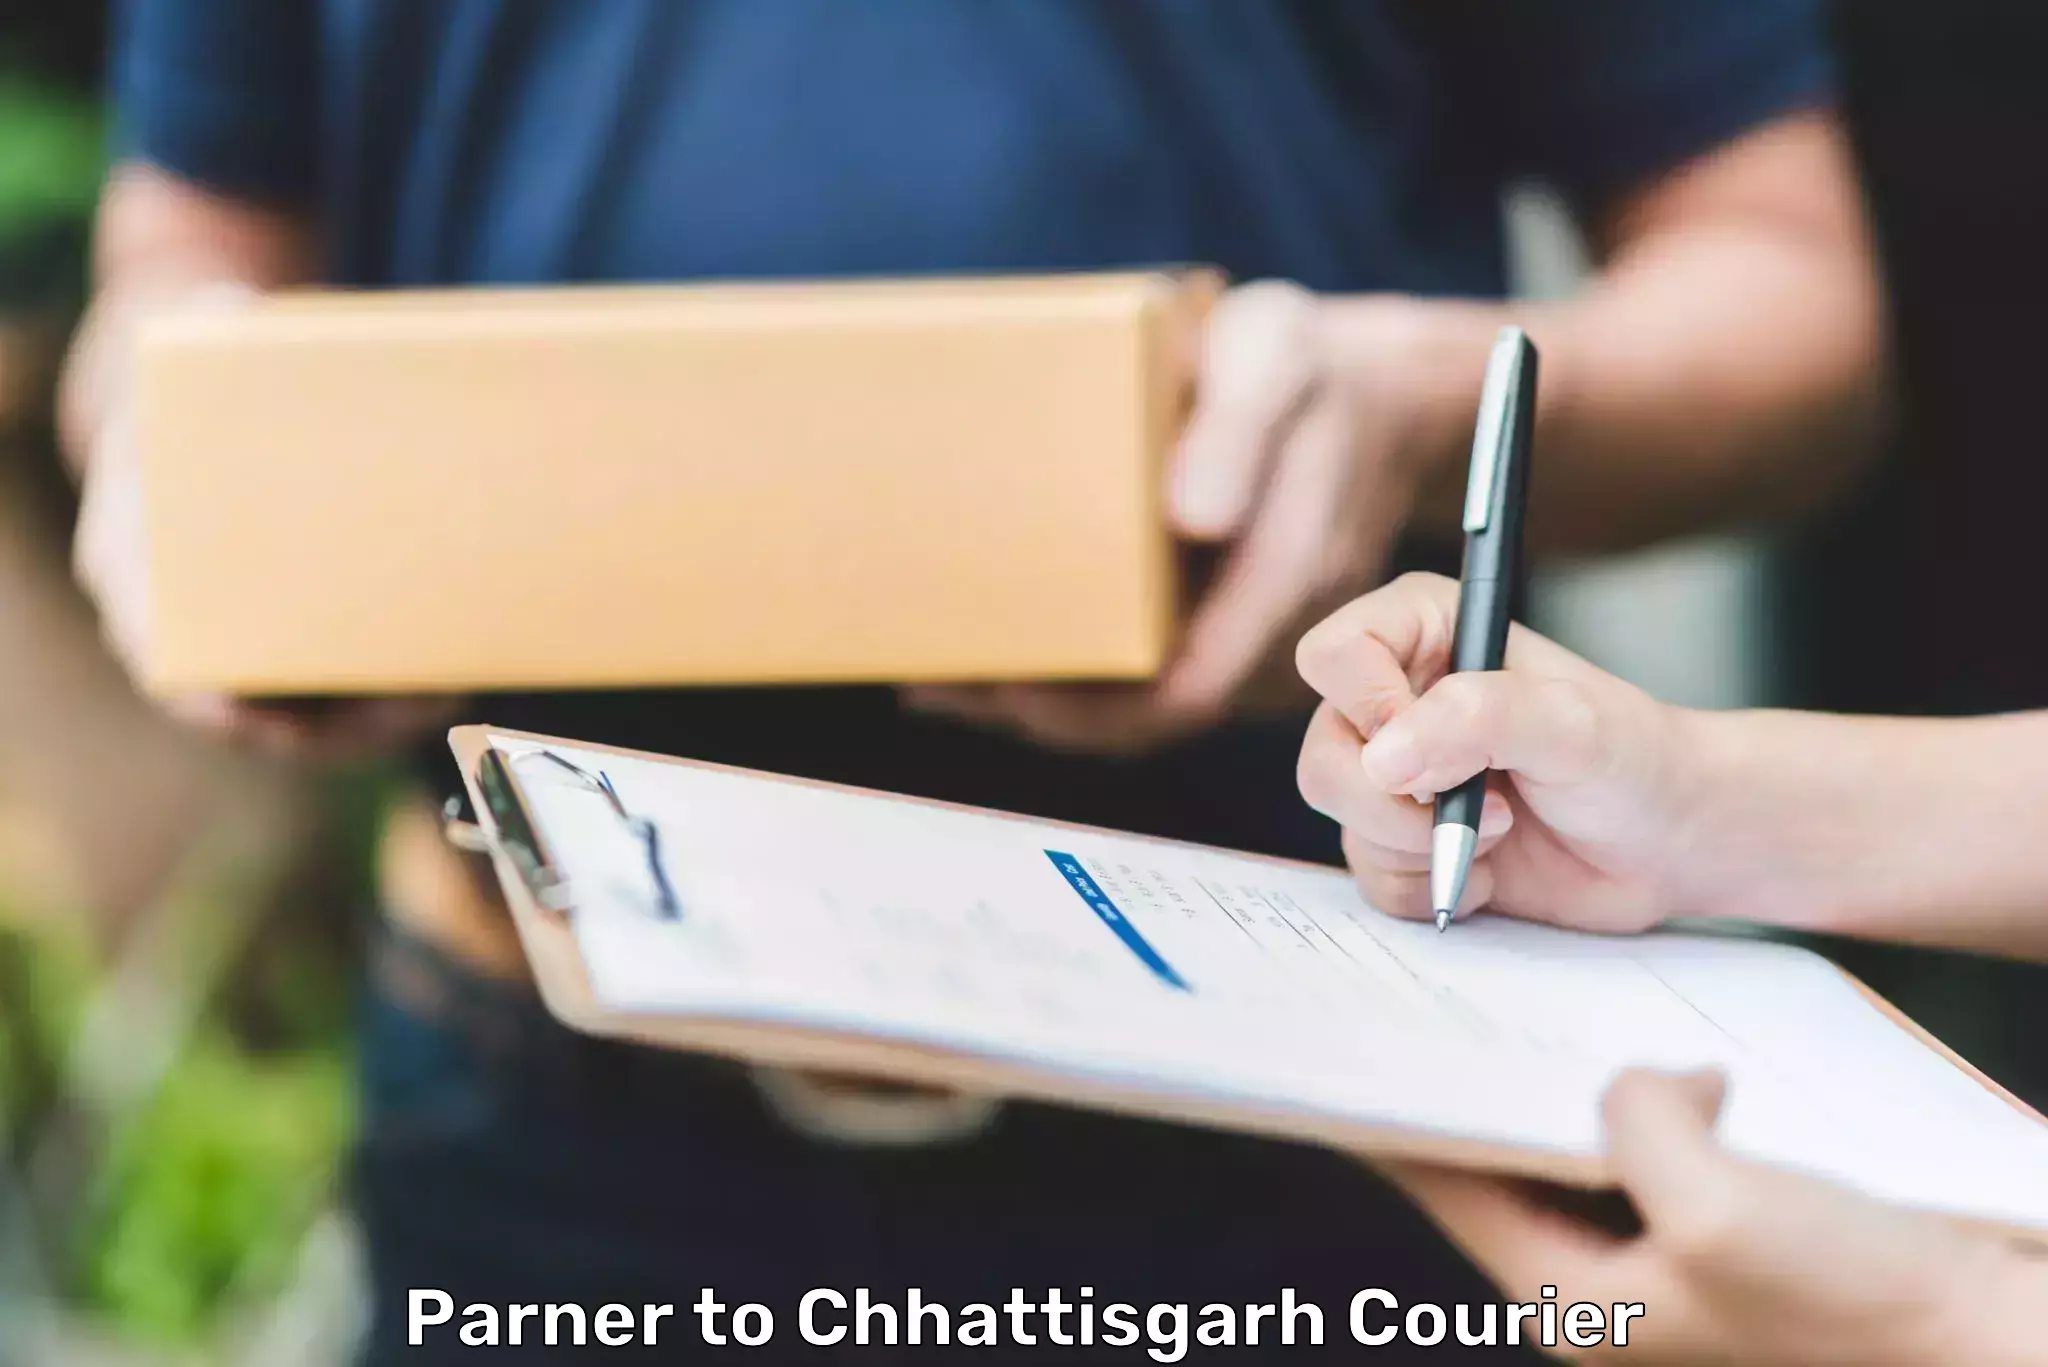 Automated parcel services Parner to Chhattisgarh